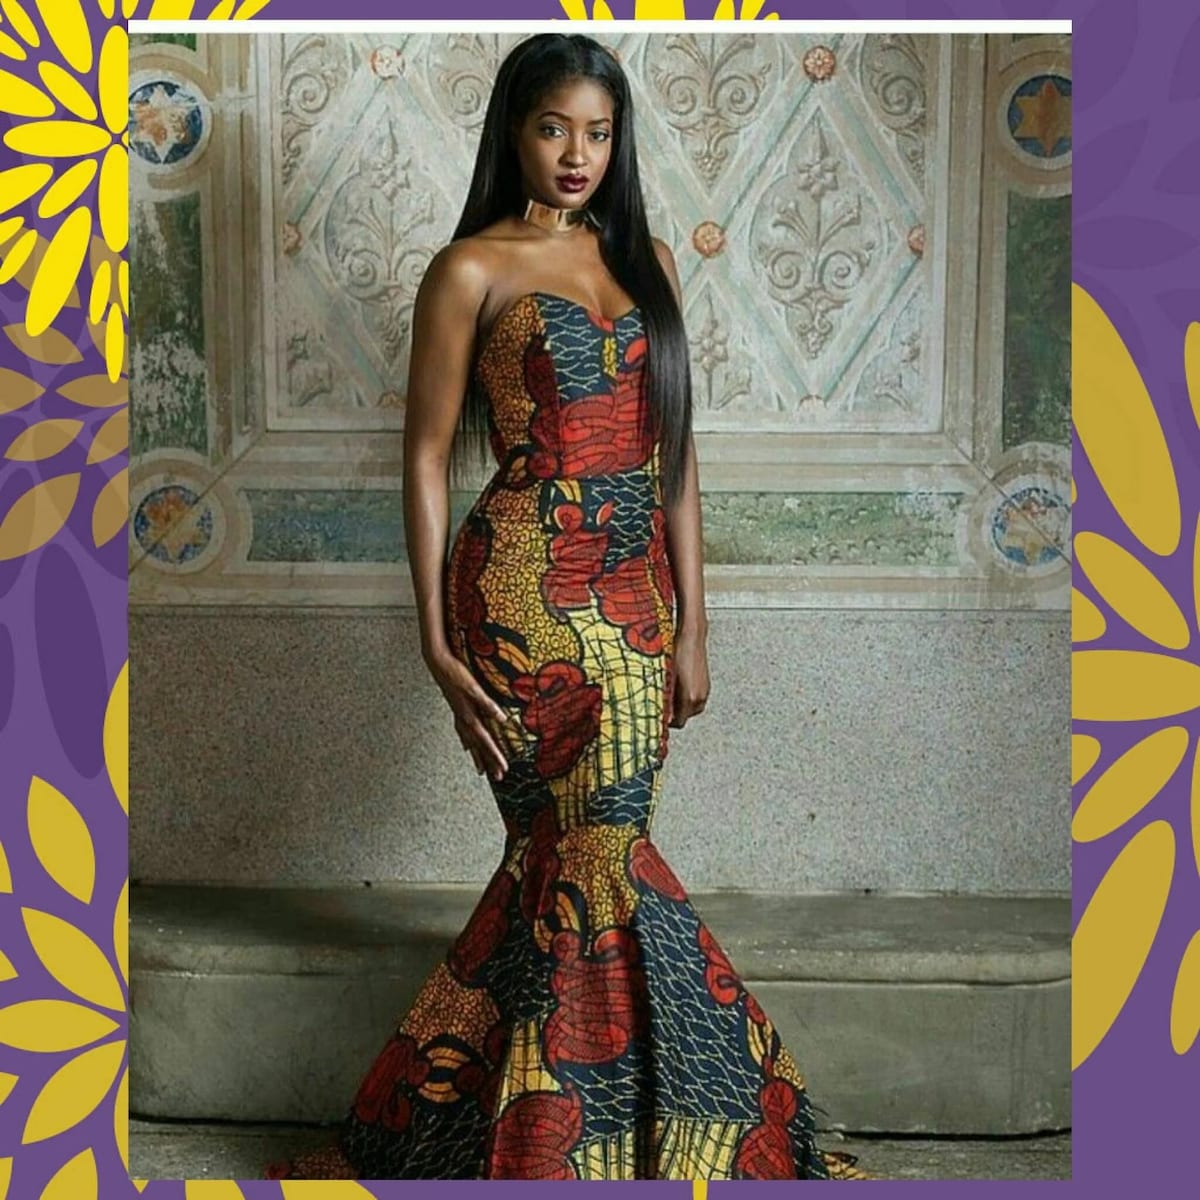 short african dresses
african wear long dresses
dress styles for african prints